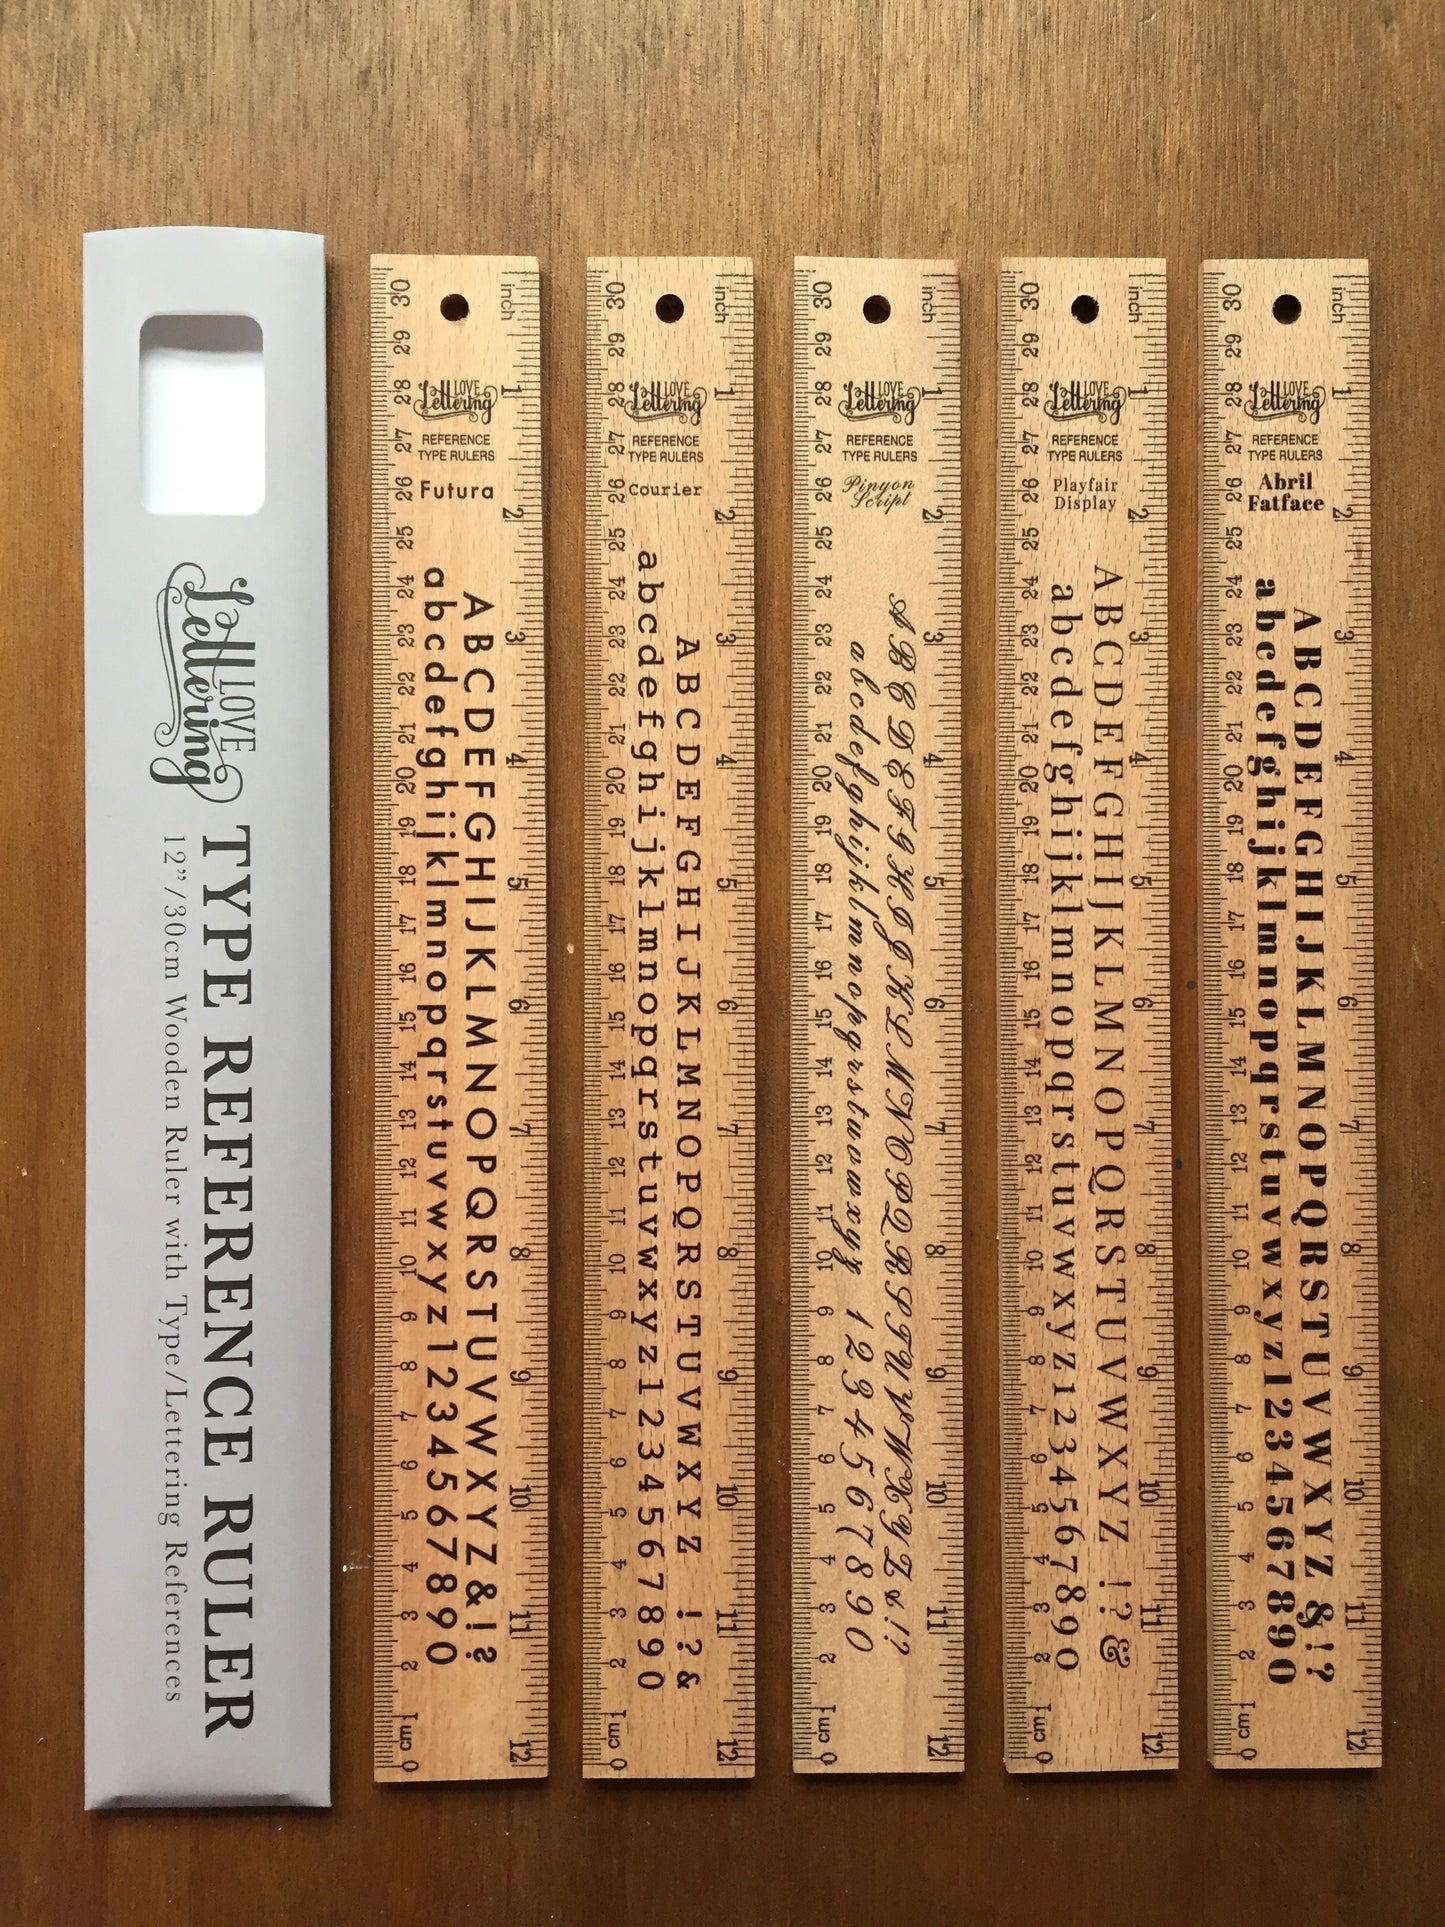 12"/30cm Wooden Ruler with Lettering/Type Reference